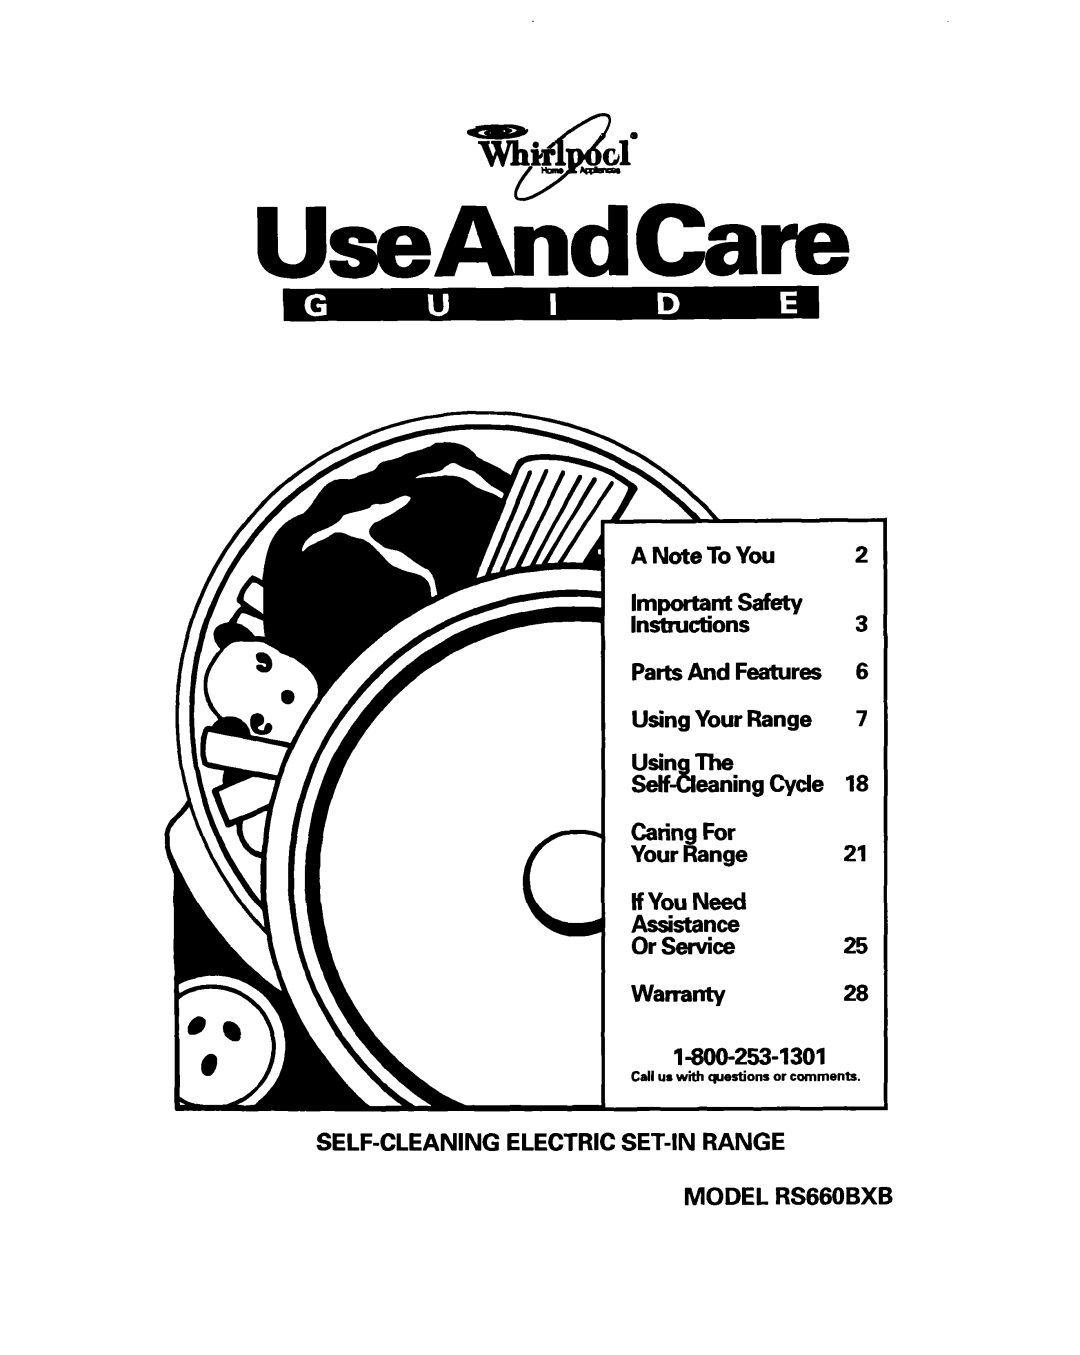 Whirlpool RS660BXB important safety instructions A Note To Y&J 